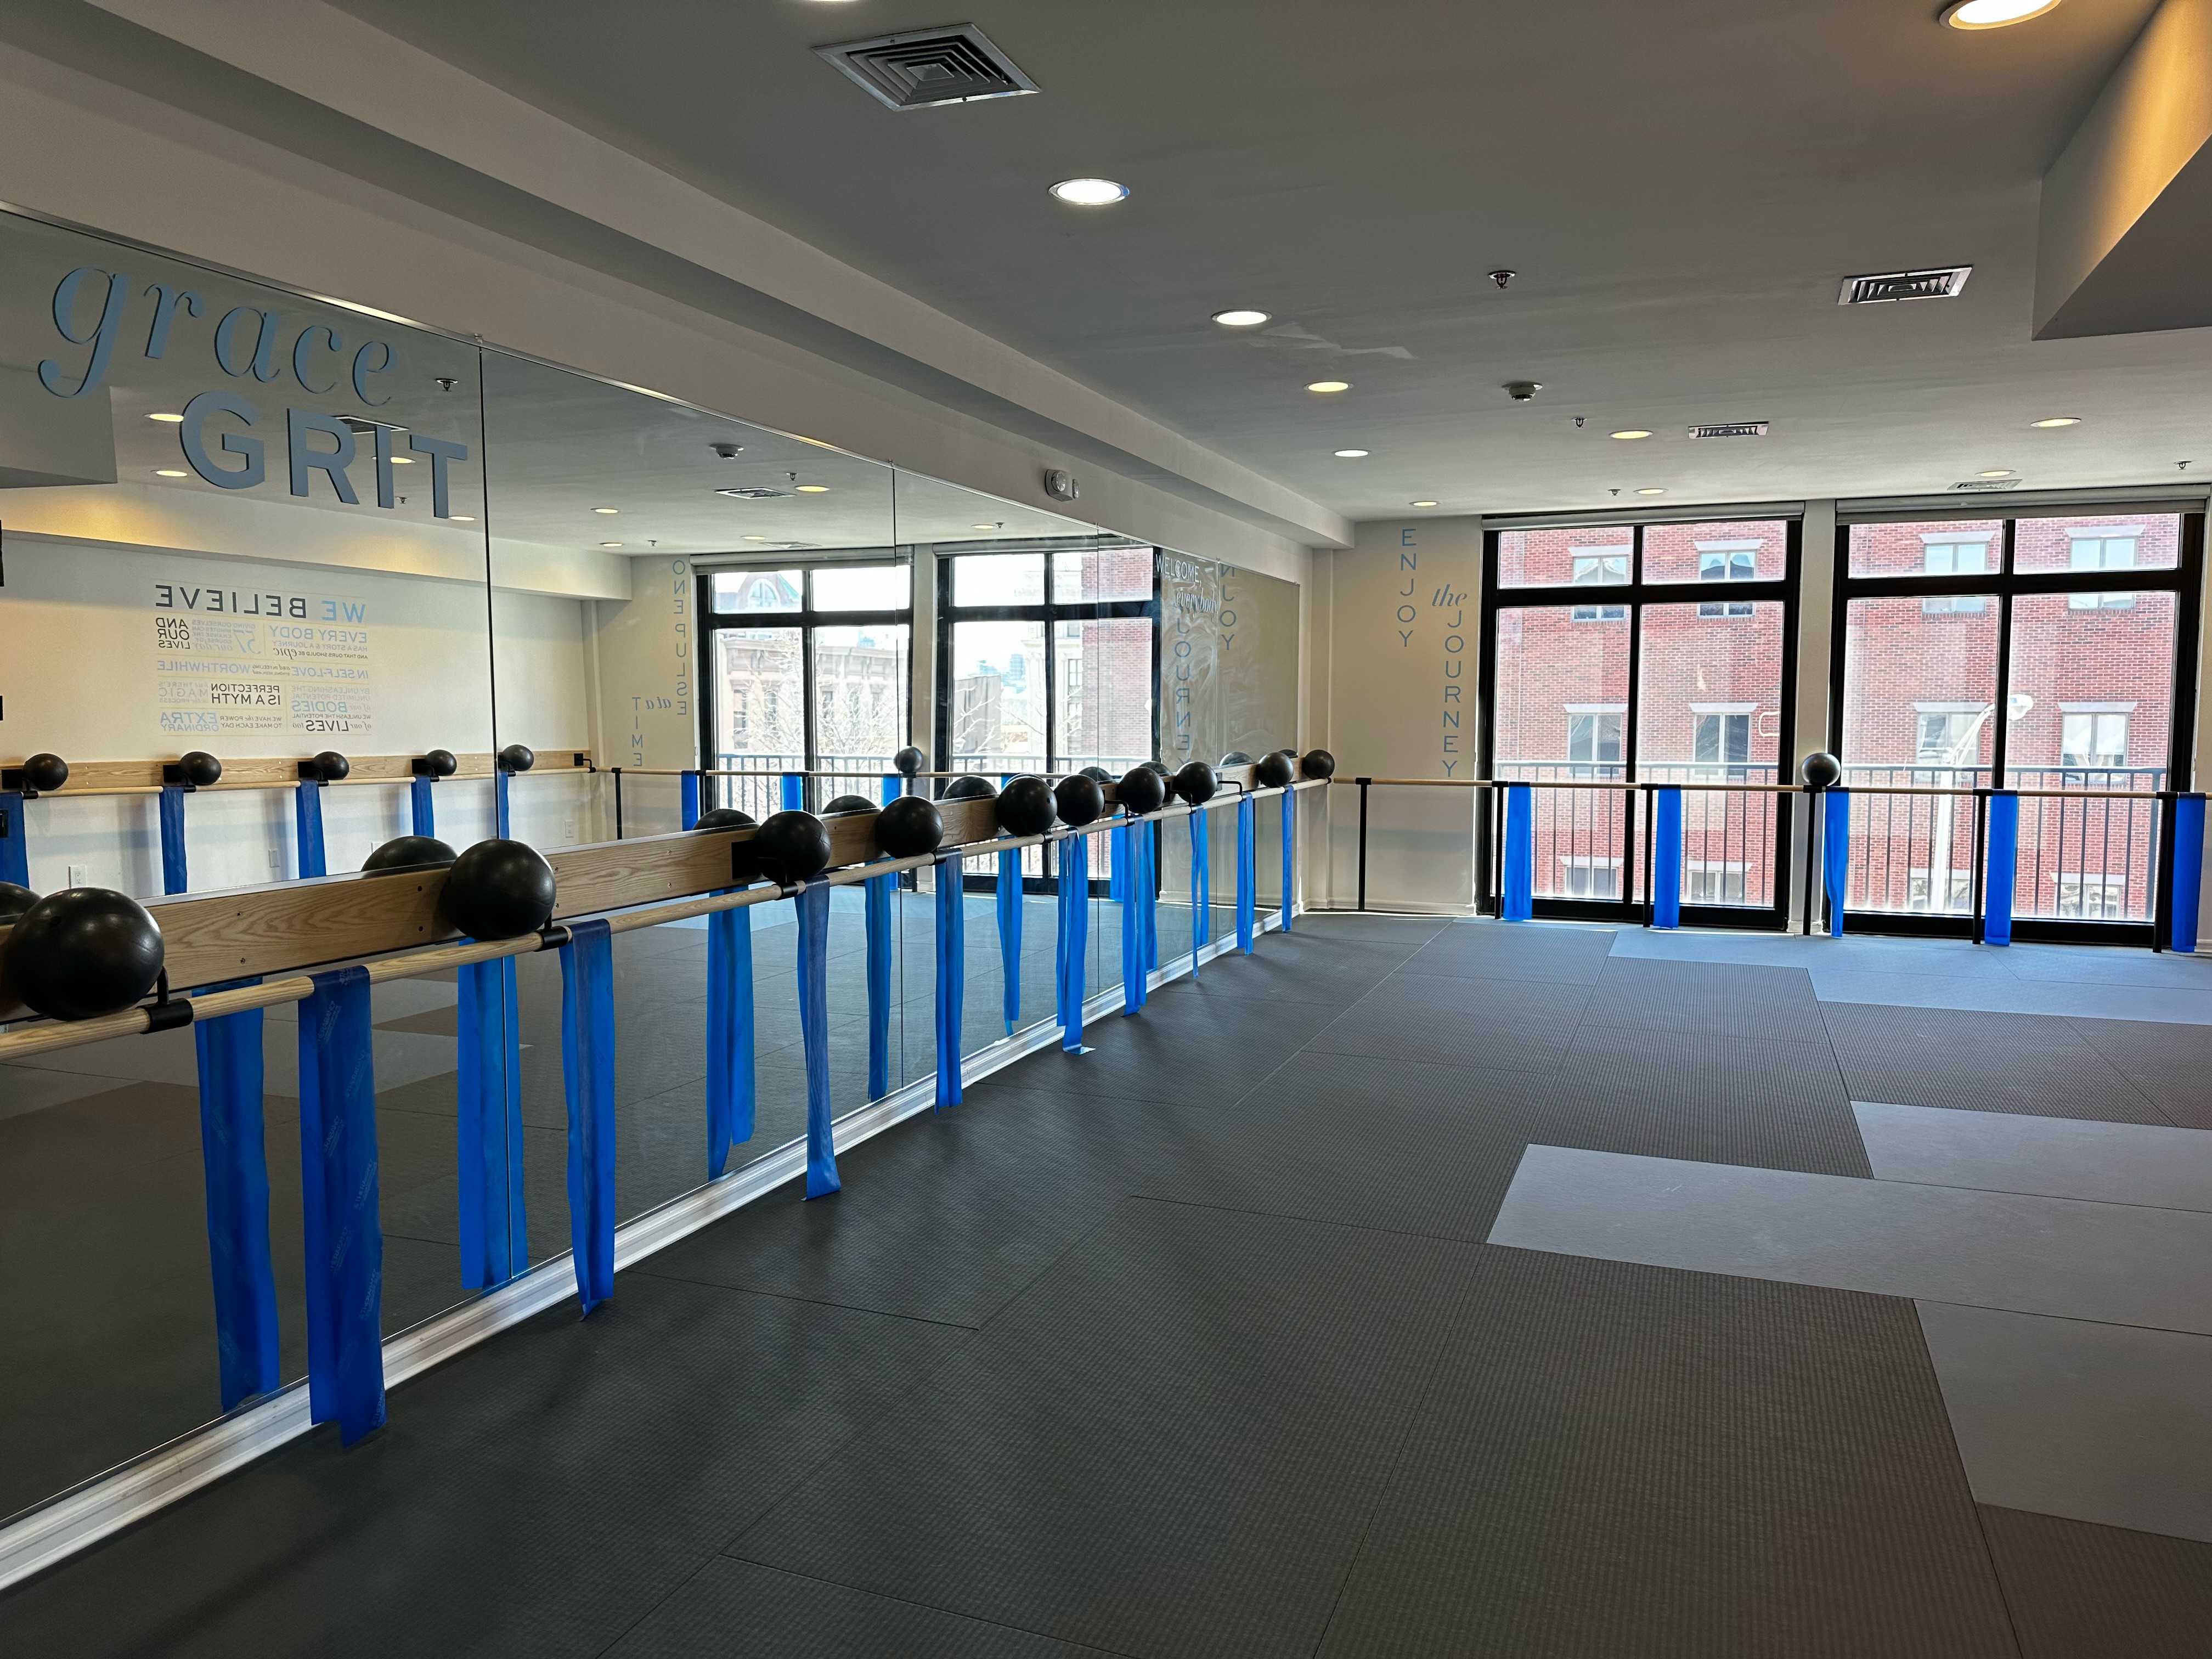 Physique 57 Hoboken, a Franchise Location of Physique 57, is Opening in Downtown Hoboken at 104 Hudson Street